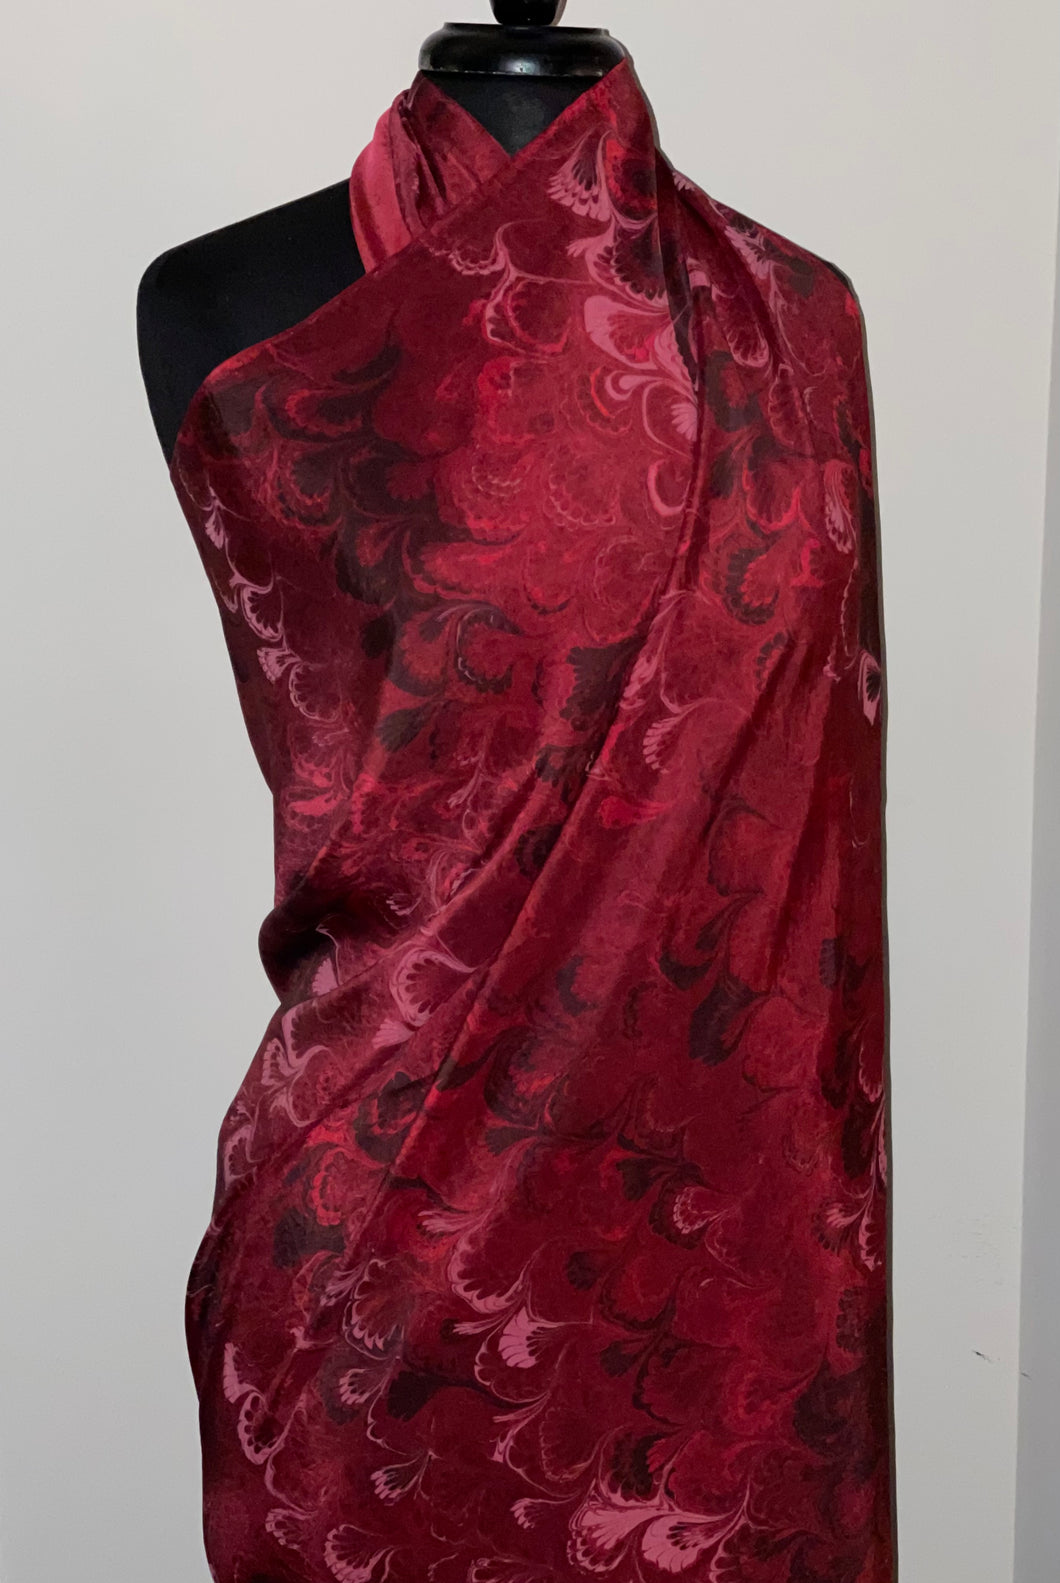 Red Bouquet Sarong Wrap 44x69 water marbled Habotai Silk combed